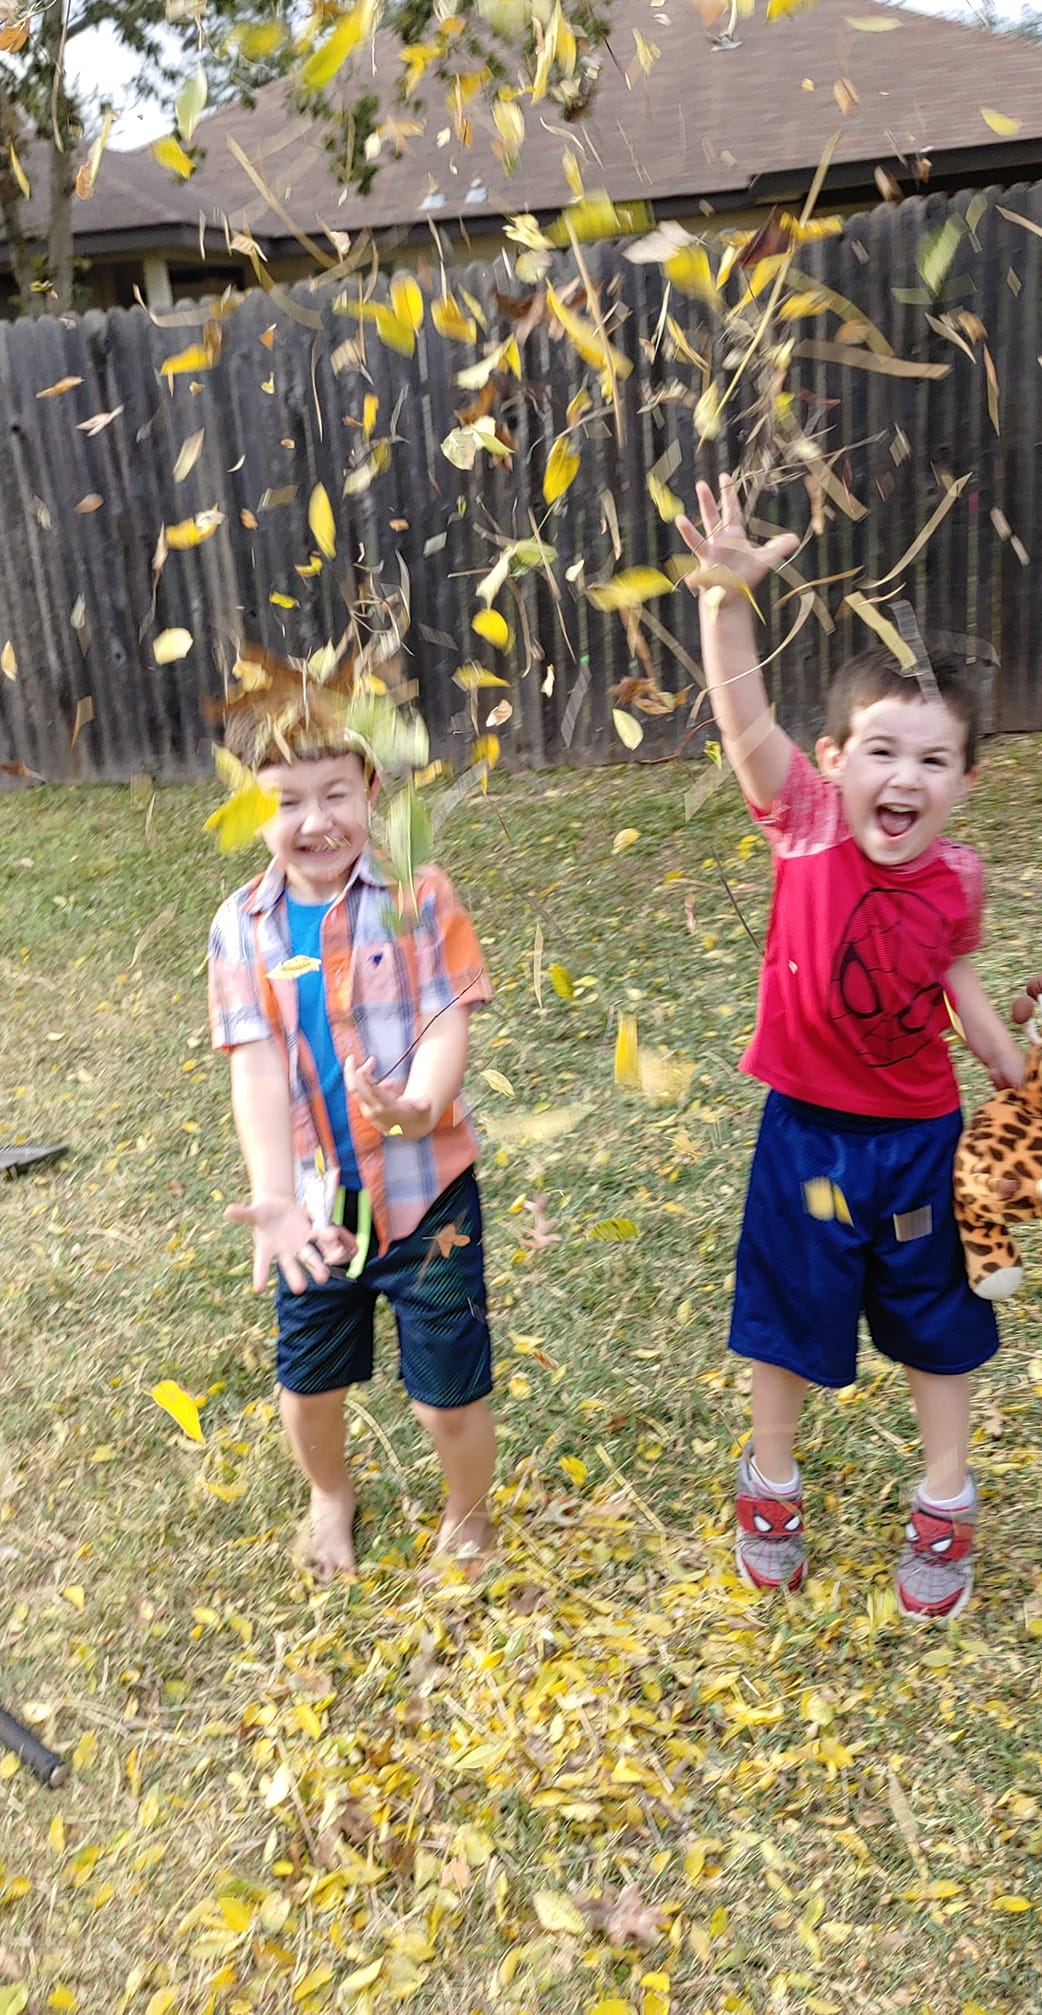 angela's 2 tubal reversal babies now young boys throwing leaves in the air